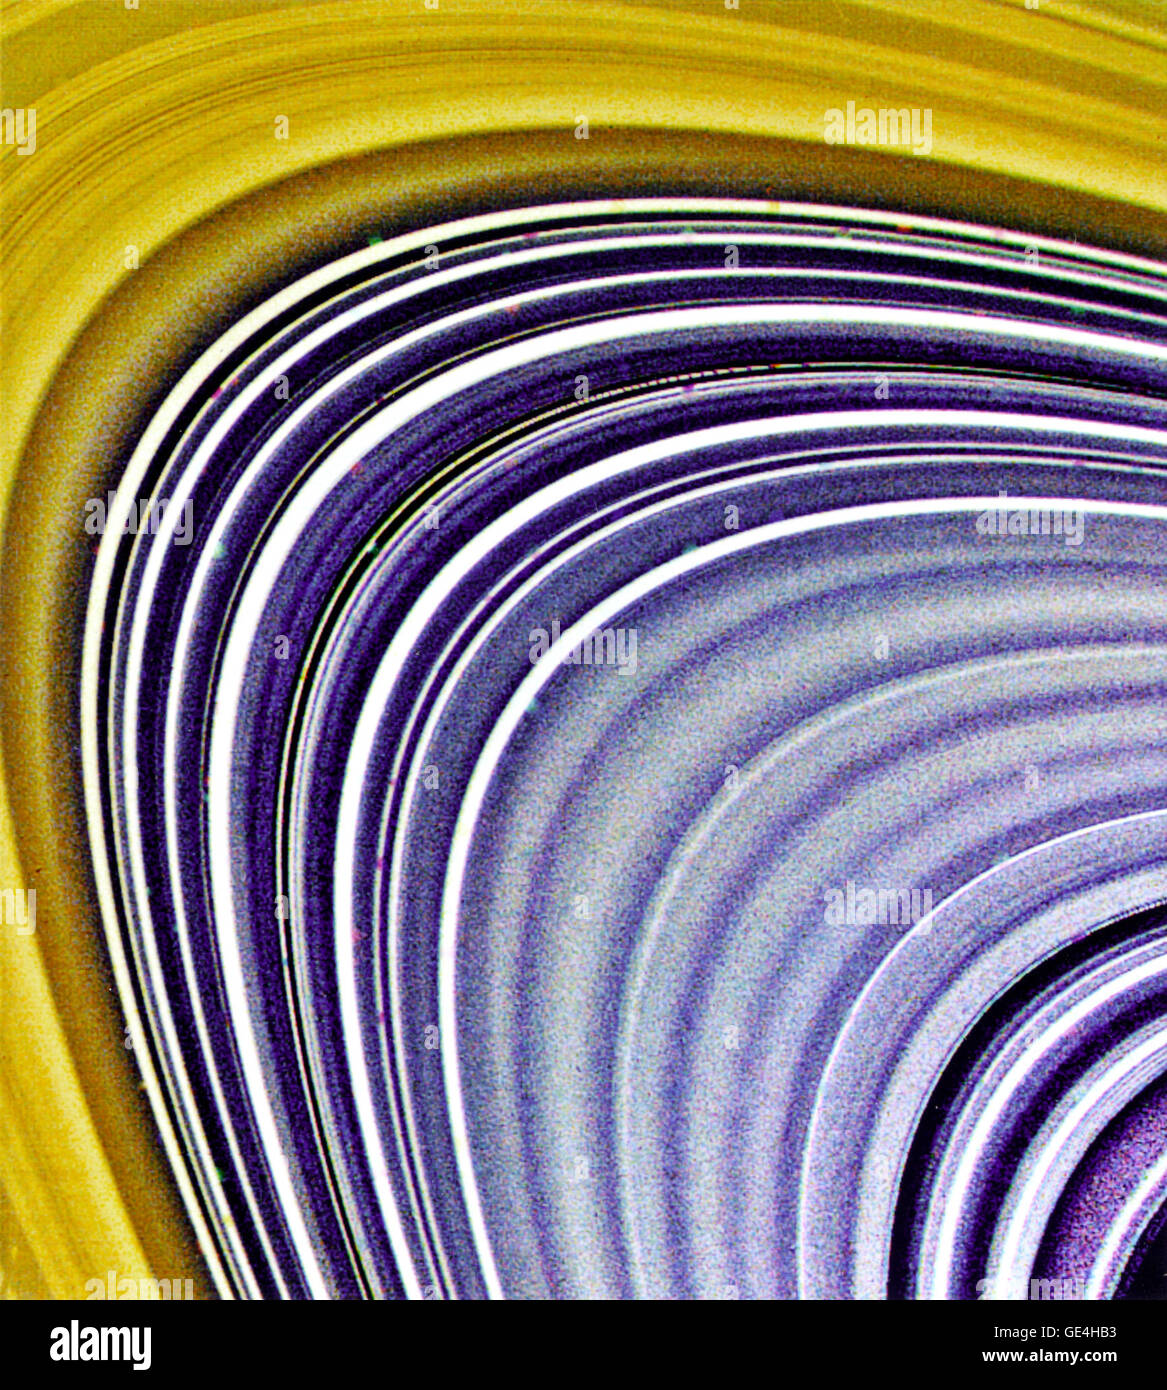 (August 23, 1981) This Voyager 2 view, focusing on Saturn's C-ring (and to a lesser extent, the B- ring at top and left) was compiled from three separate images taken through ultraviolet, clear and green filters. On August 23, 1981, when it acquired these frames, Voyager 2 was 2.7 million kilometers (1.7 million miles) from the planet. In general, C-ring material is very bland and gray, the color of dirty ice. Color differences between this ring and the B-ring indicate differing surface compositions for the material composing these complex structures. More than 60 bright and dark ringlets are  Stock Photo